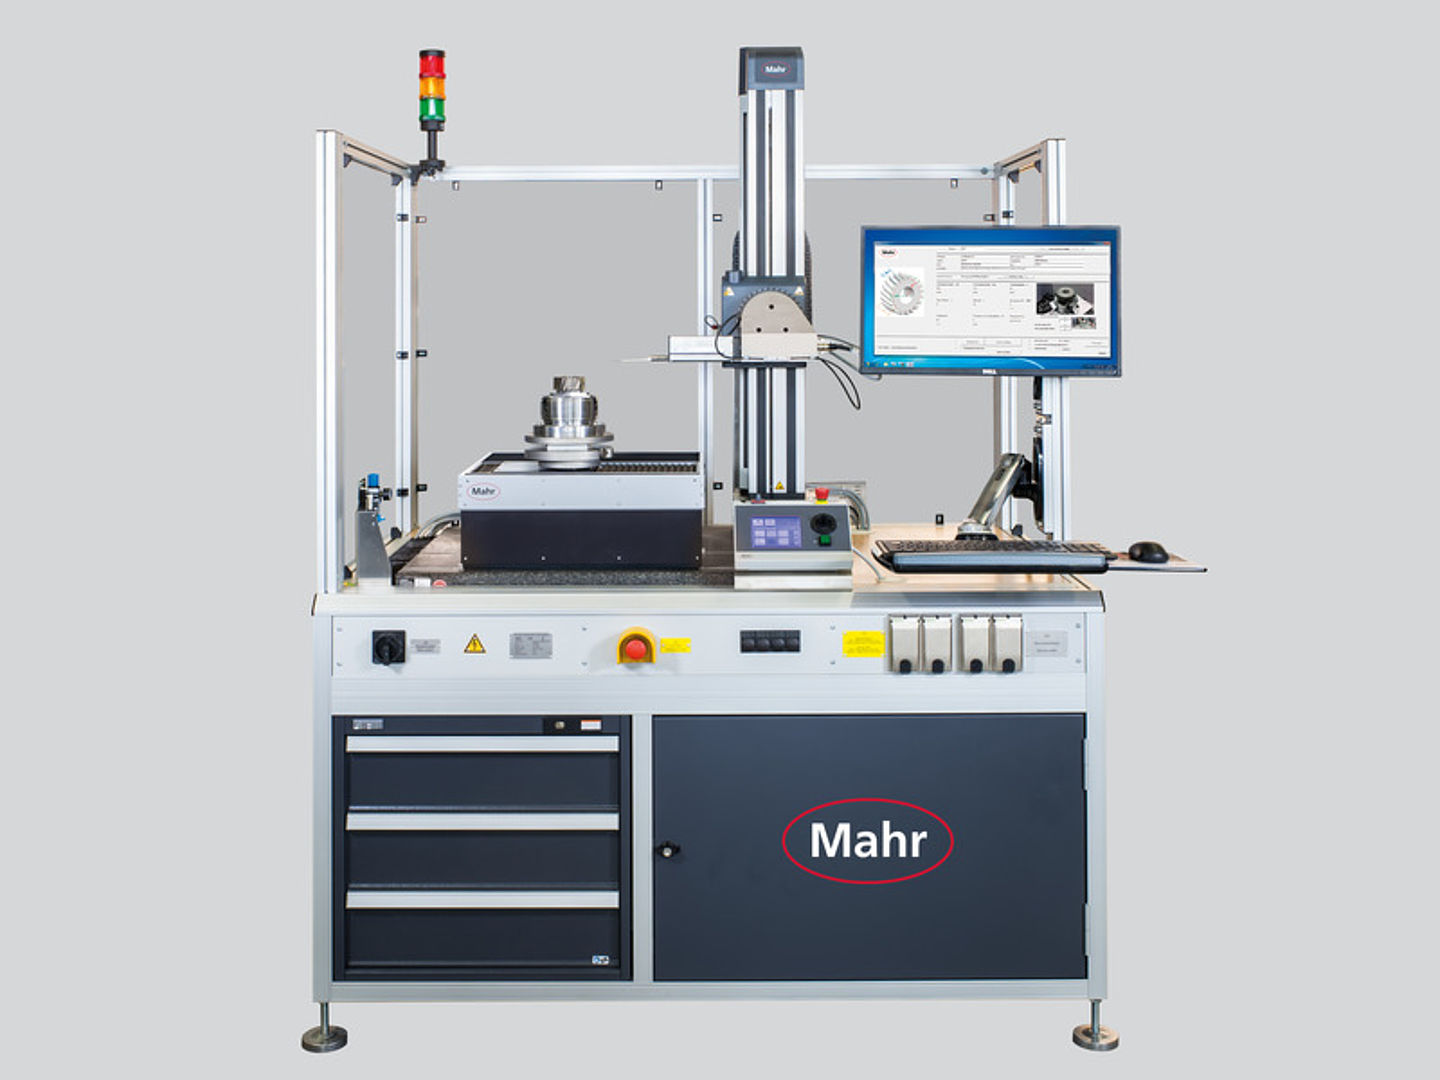 Overview of the MarSurf Engineered Series 1300 measurement station.